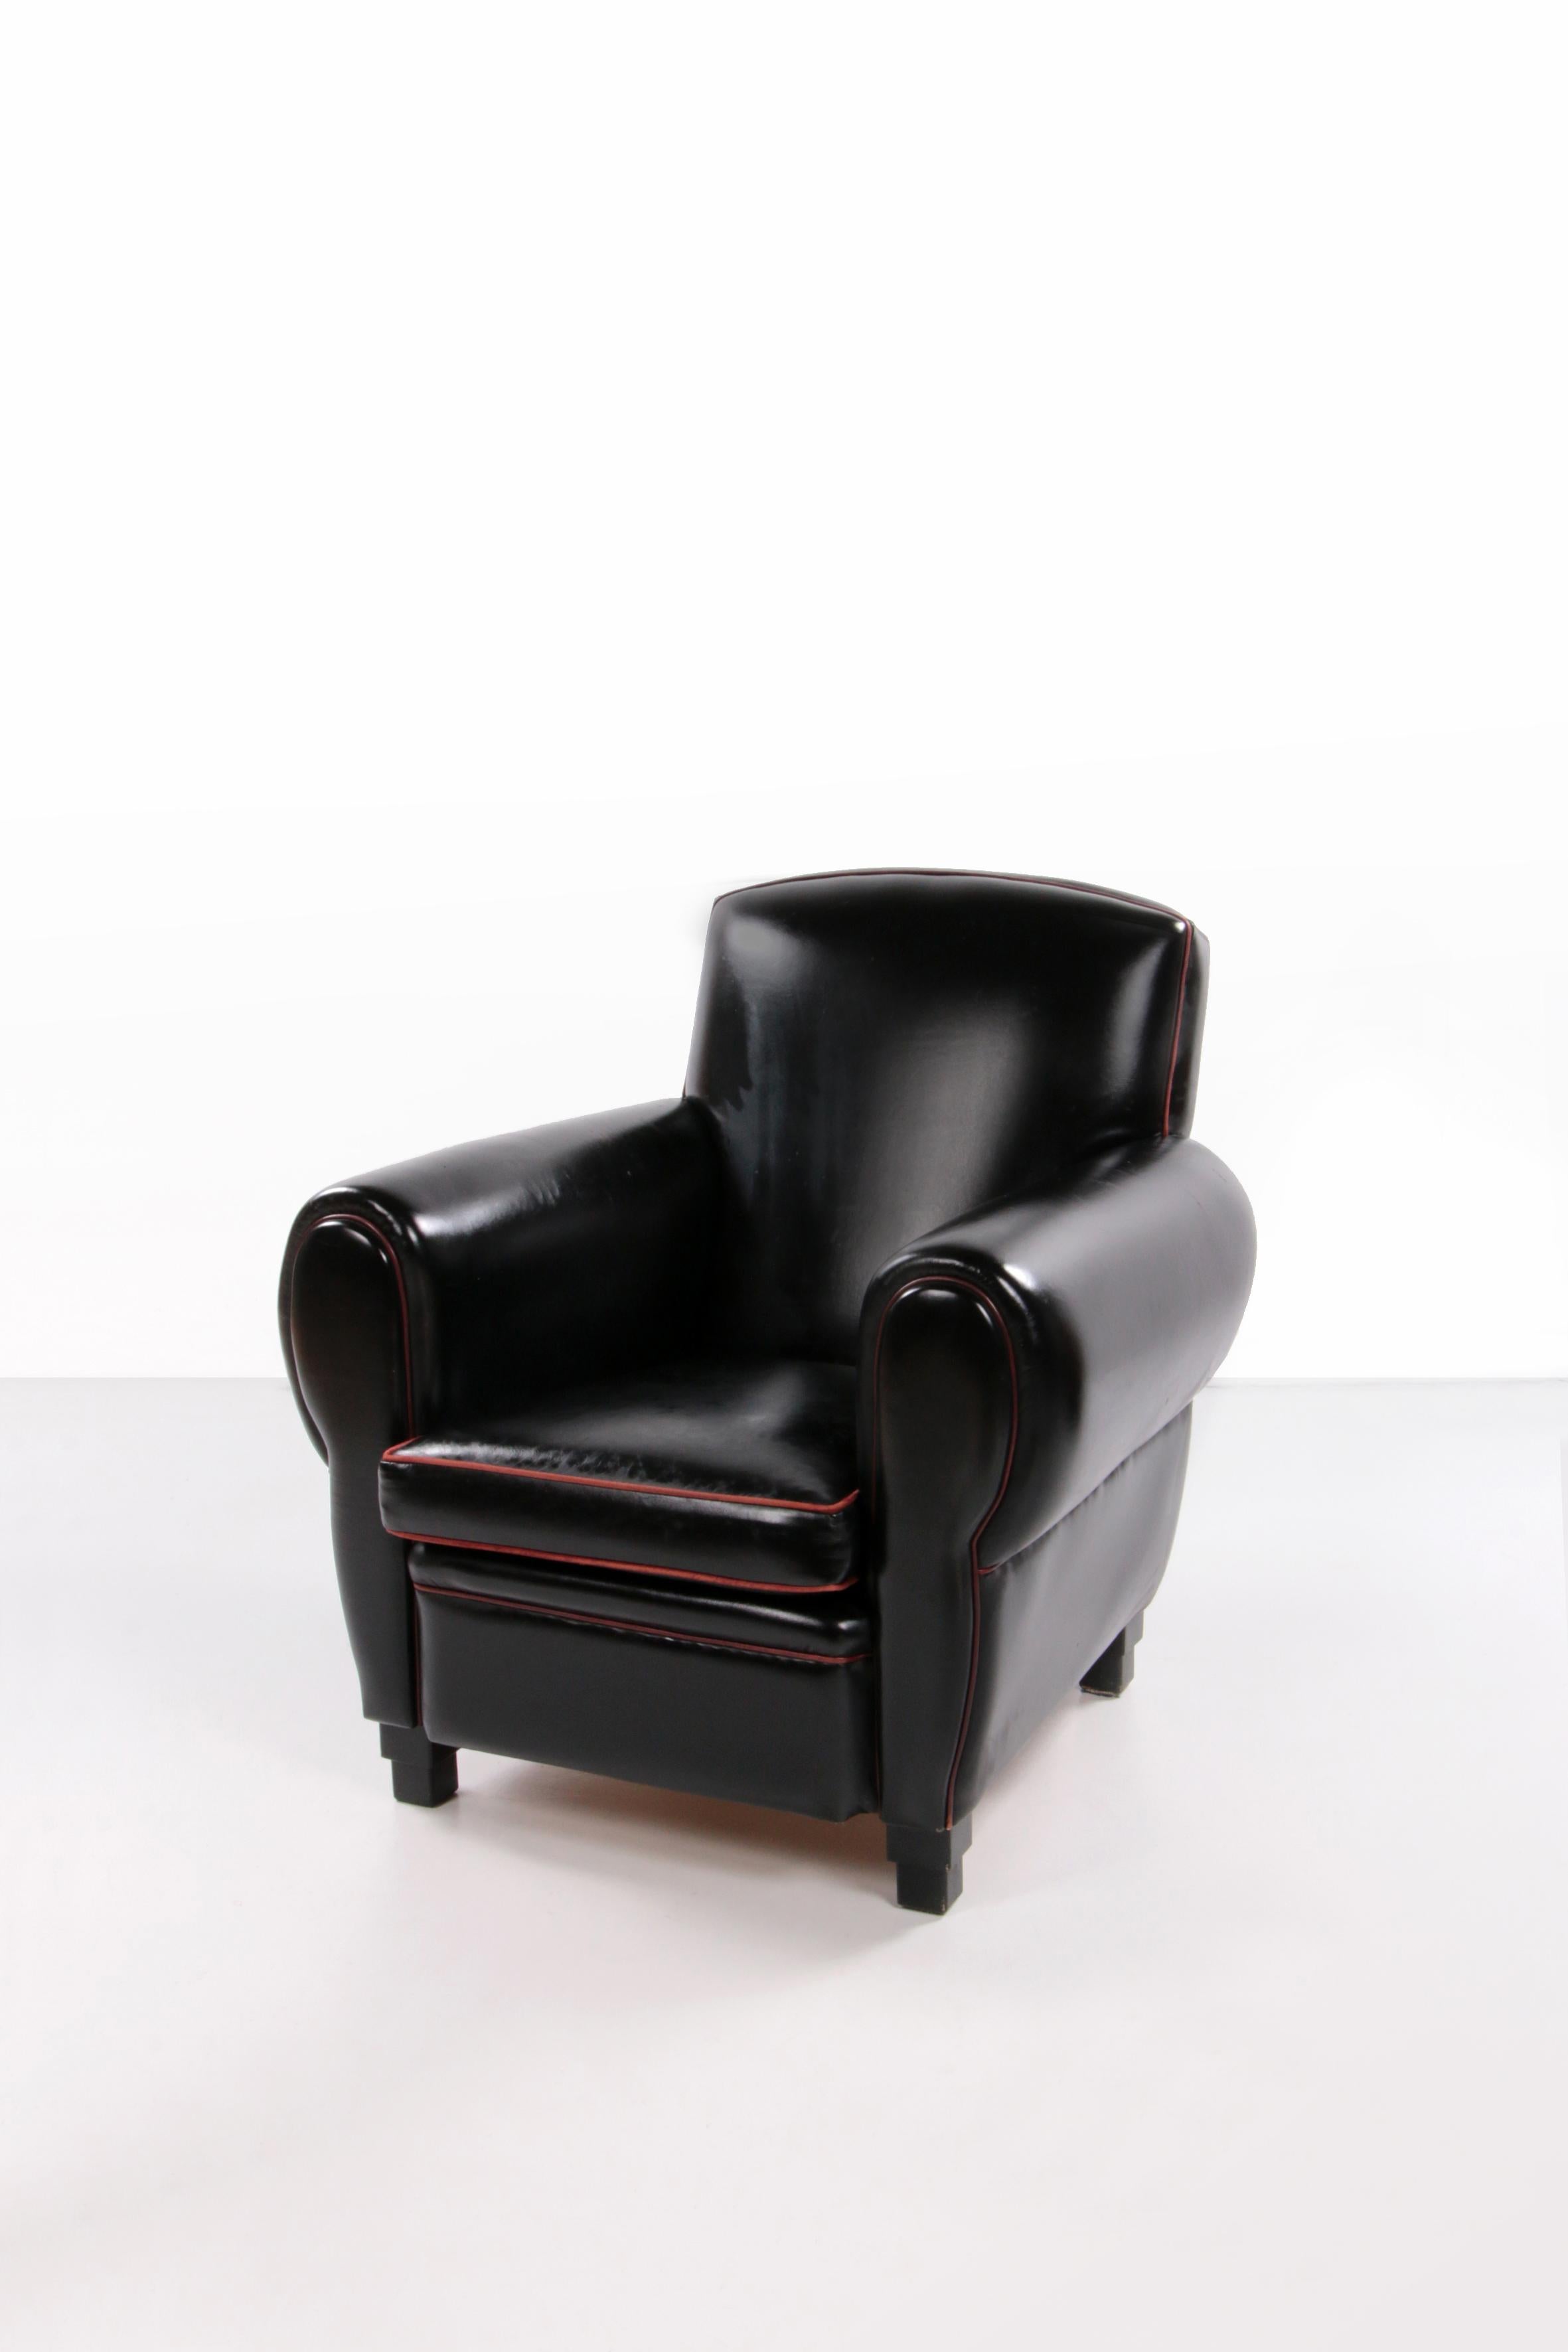 Very comfortable and beautiful leather armchair from LA Lounge Atelier.


This is a nice heavy quality leather chair from the LA Lounge Atelier brand.

The seating comfort of this chair is perfect, the filling and the leather are still in a